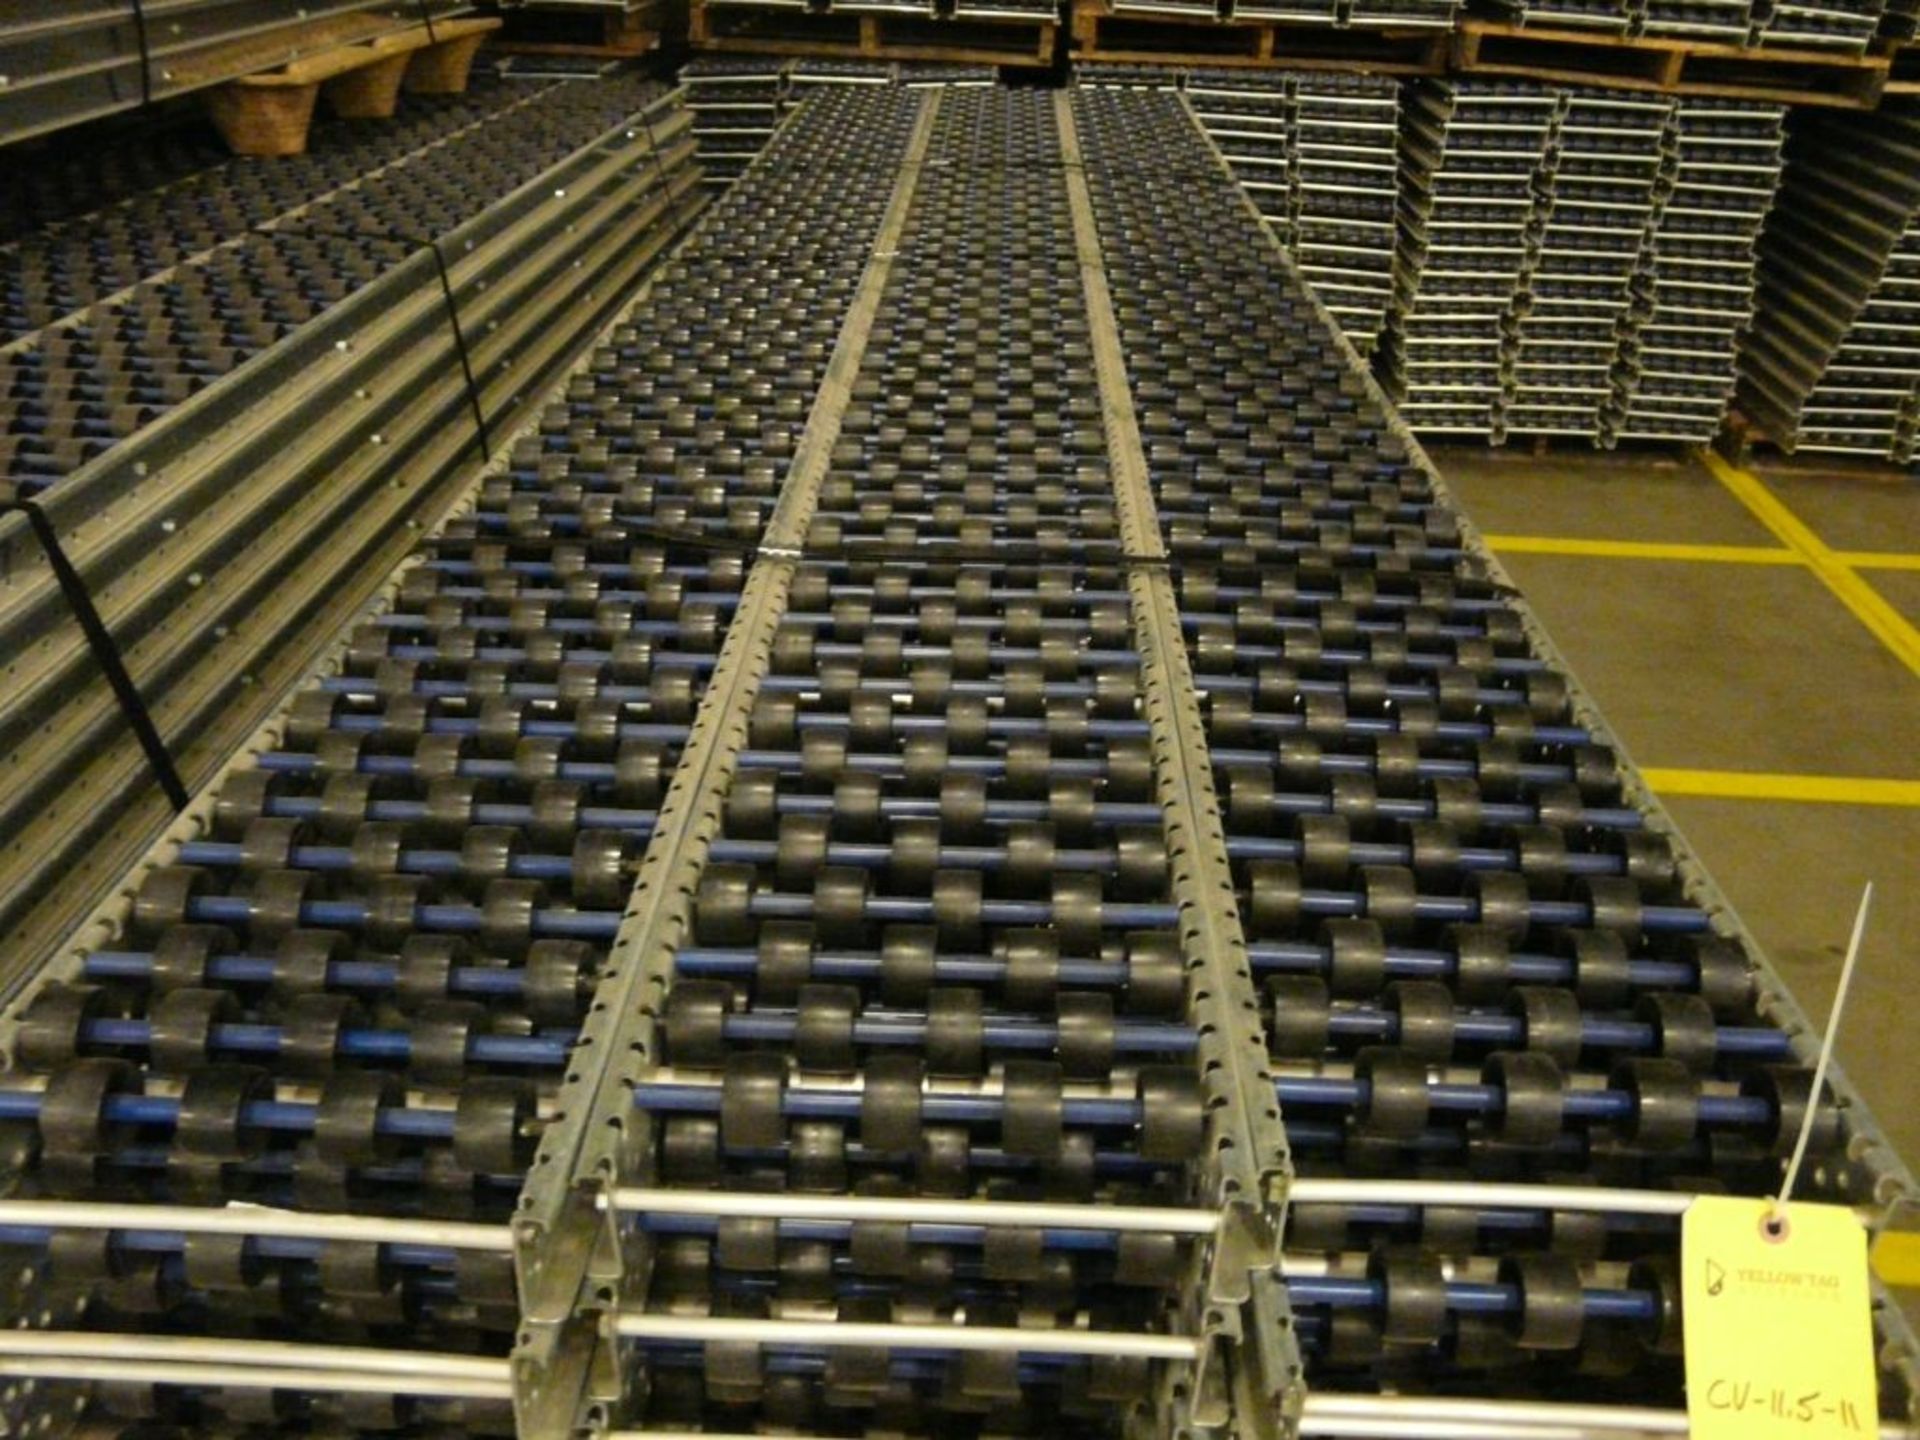 Lot of (90) SpanTrack Wheelbed Carton Flow Conveyors - 11.5'L x 11"W; Tag: 224212 - $30 Lot - Image 3 of 4